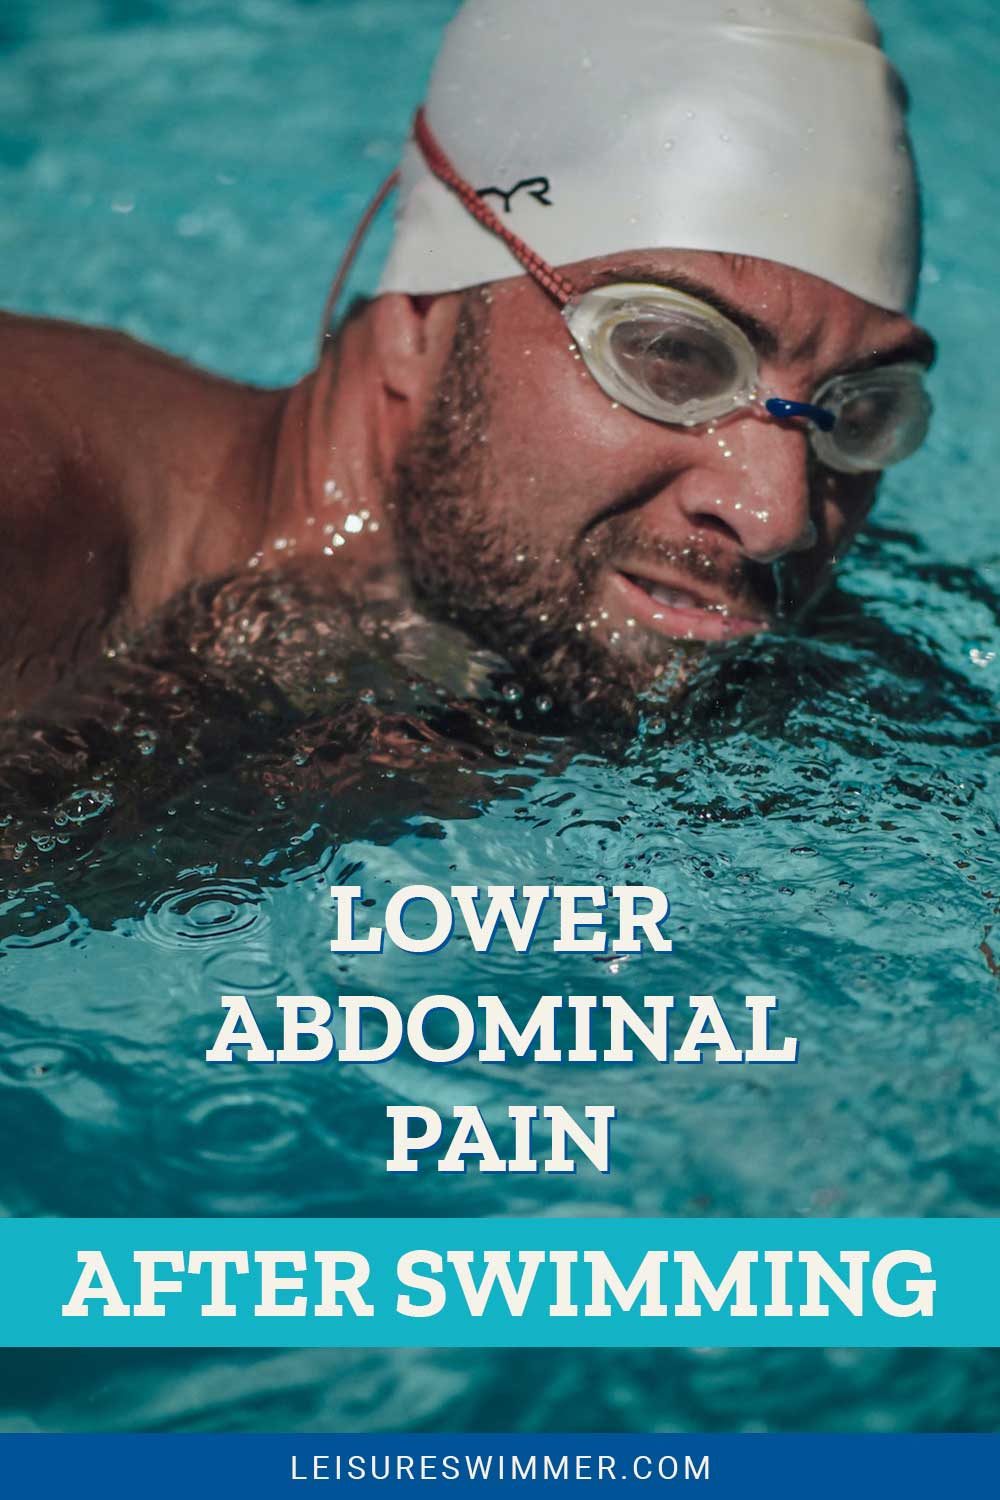 Man swimming wearing white swimming cap and goggles - Lower Abdominal Pain After Swimming.